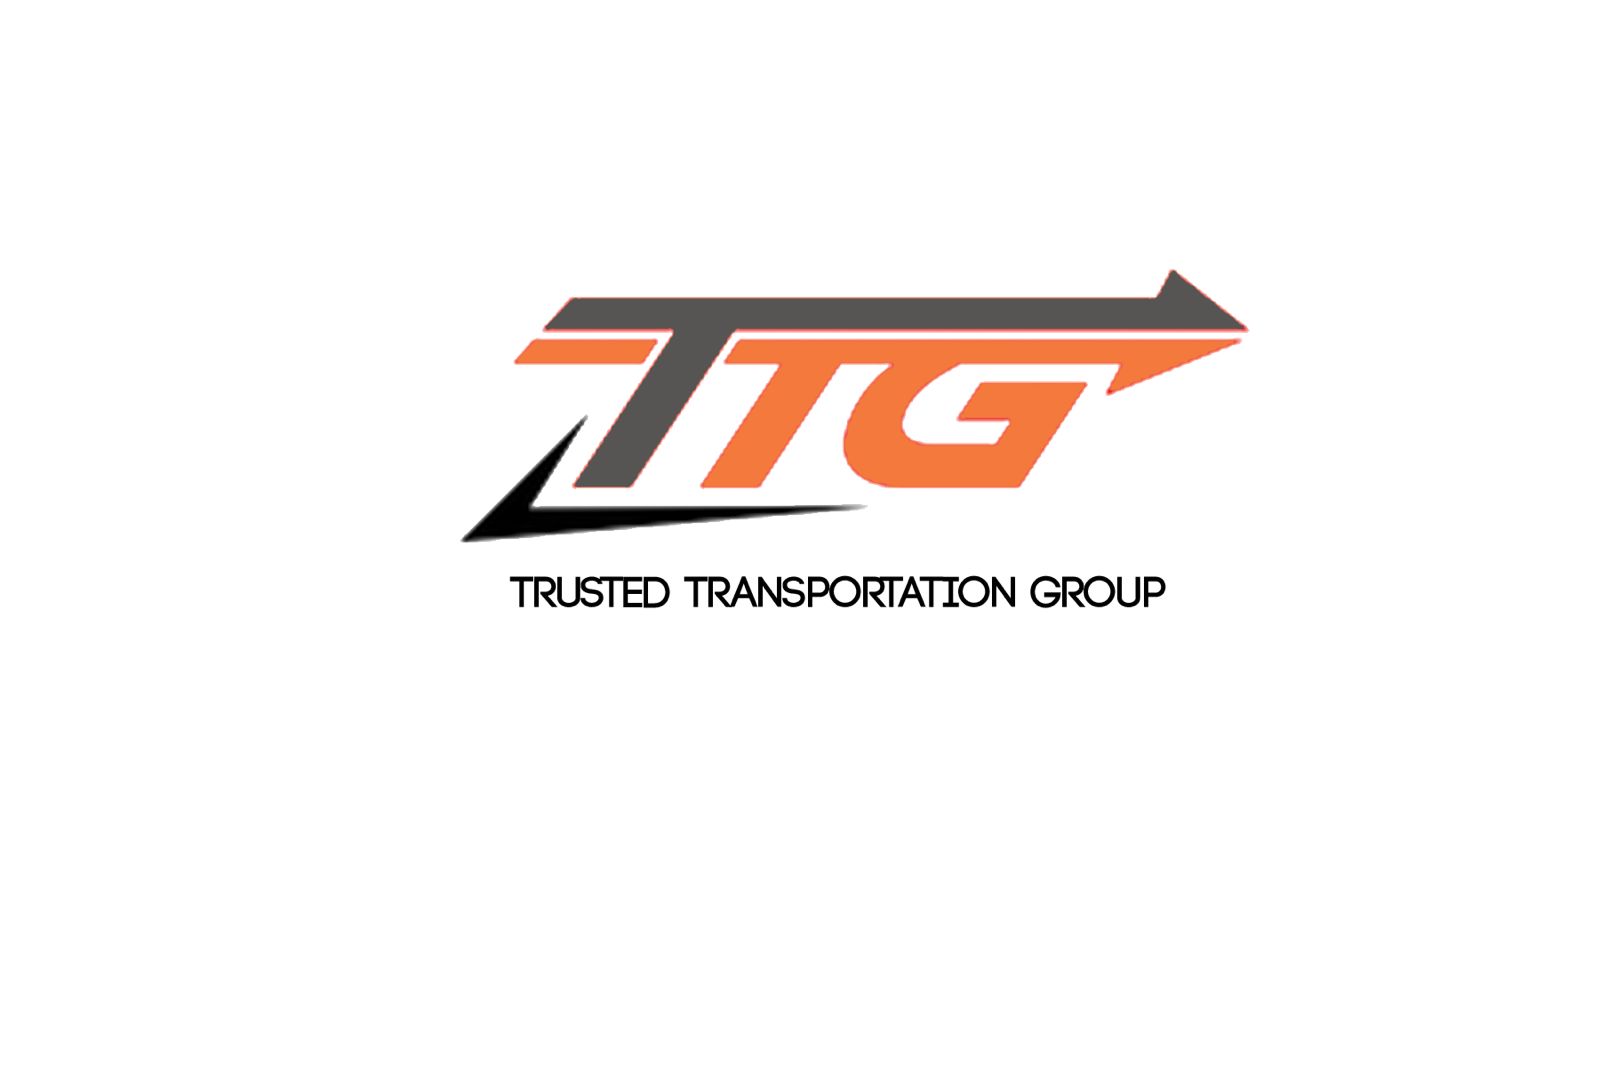 Trusted Transportation Group